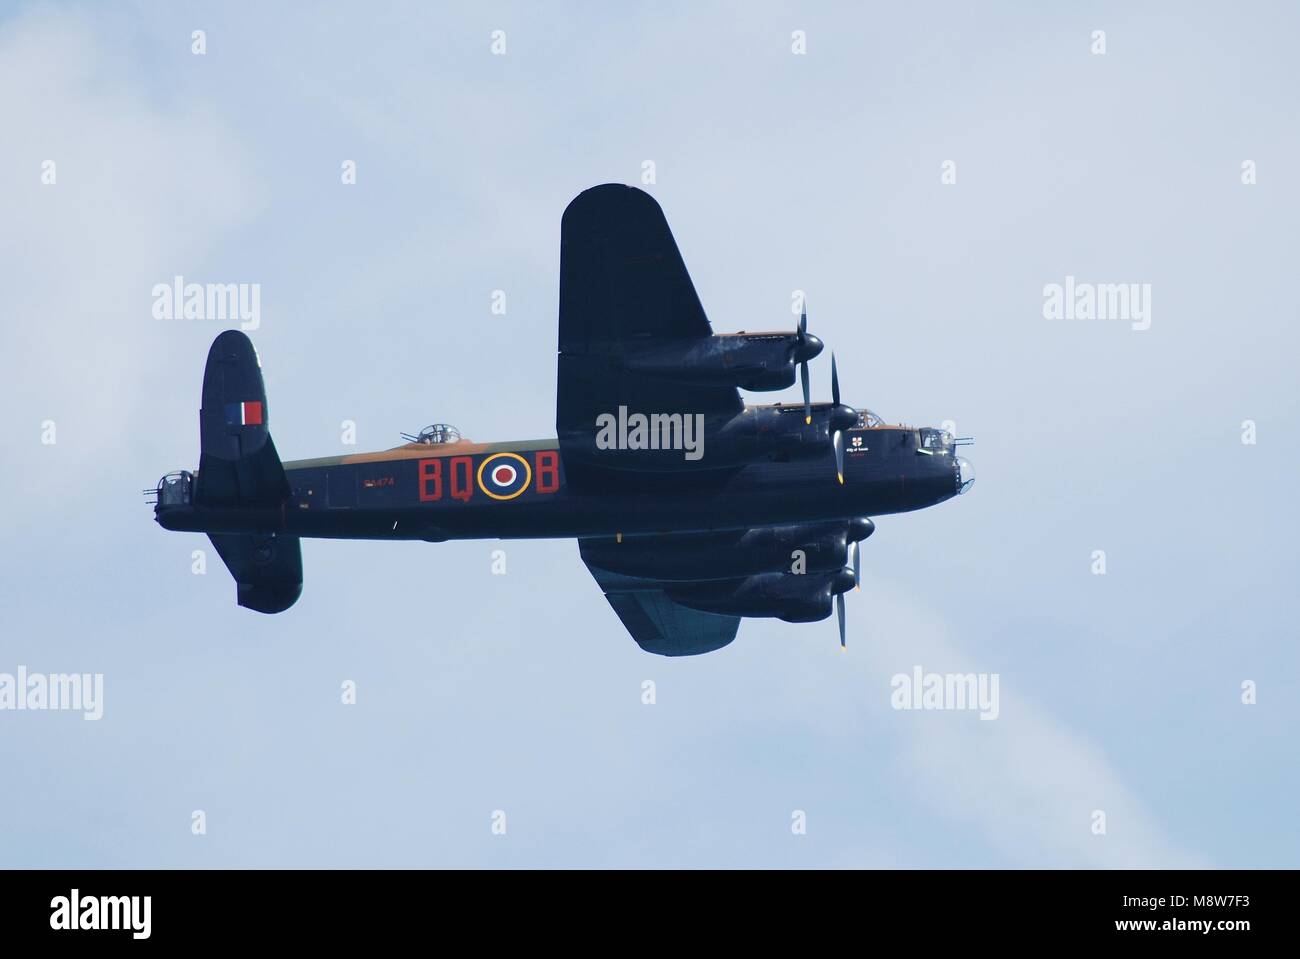 Avro Lancaster PA474 of the Battle of Britain Memorial Flight performs at the Airbourne airshow at Eastbourne, England on August 11, 2012. Stock Photo